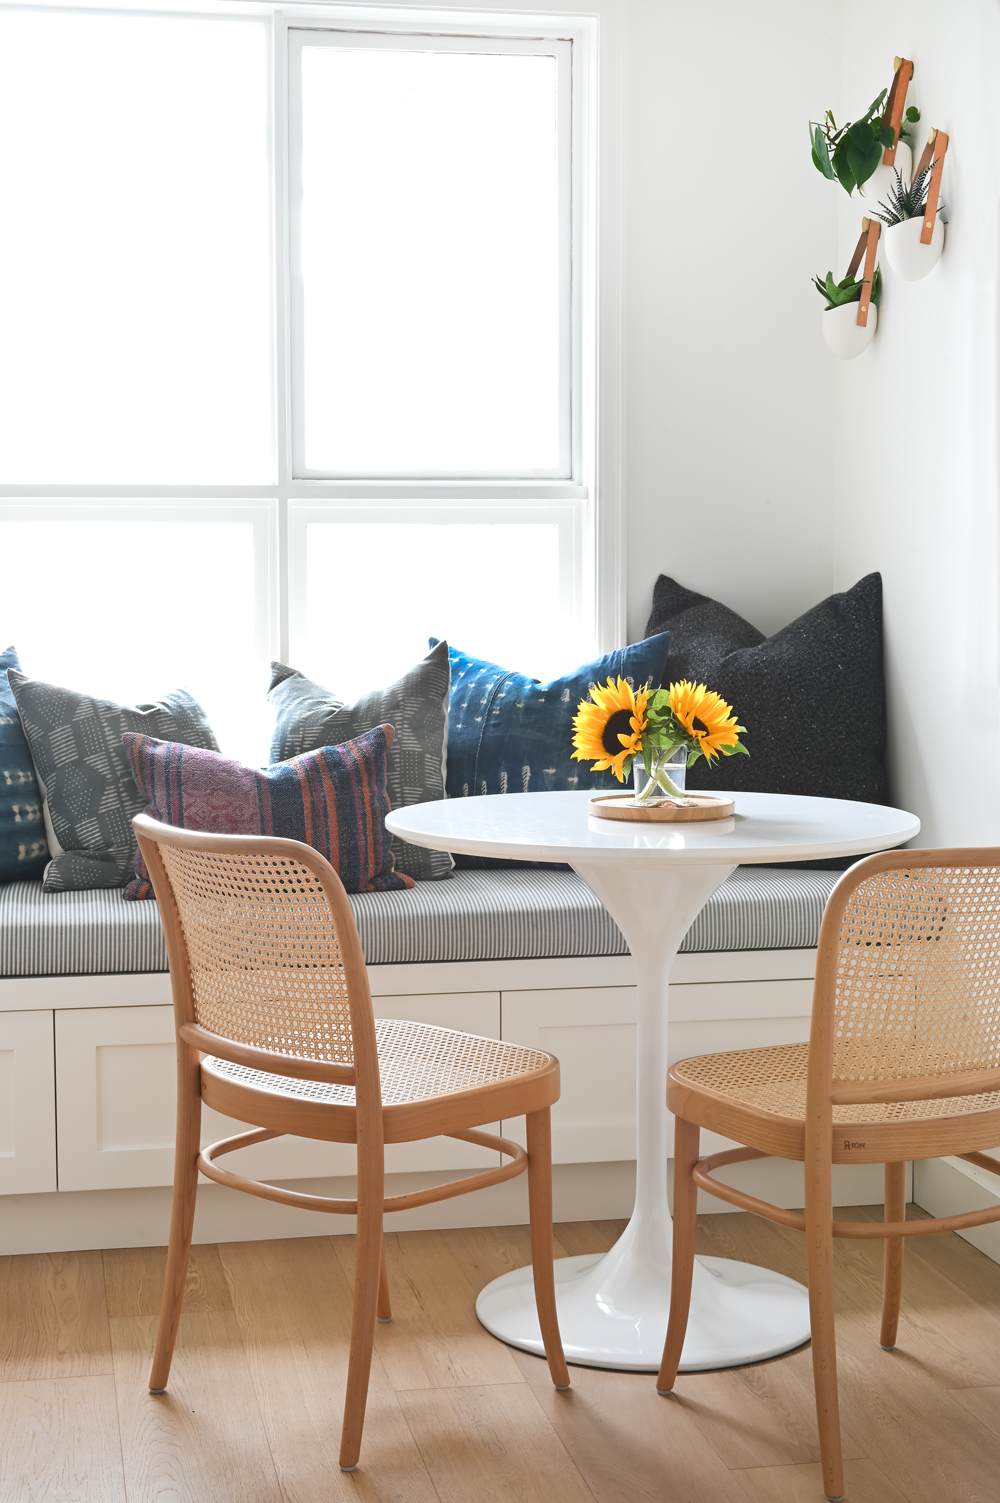 two cane chairs, white tulip table and built in bench with cushions in breakfast nook